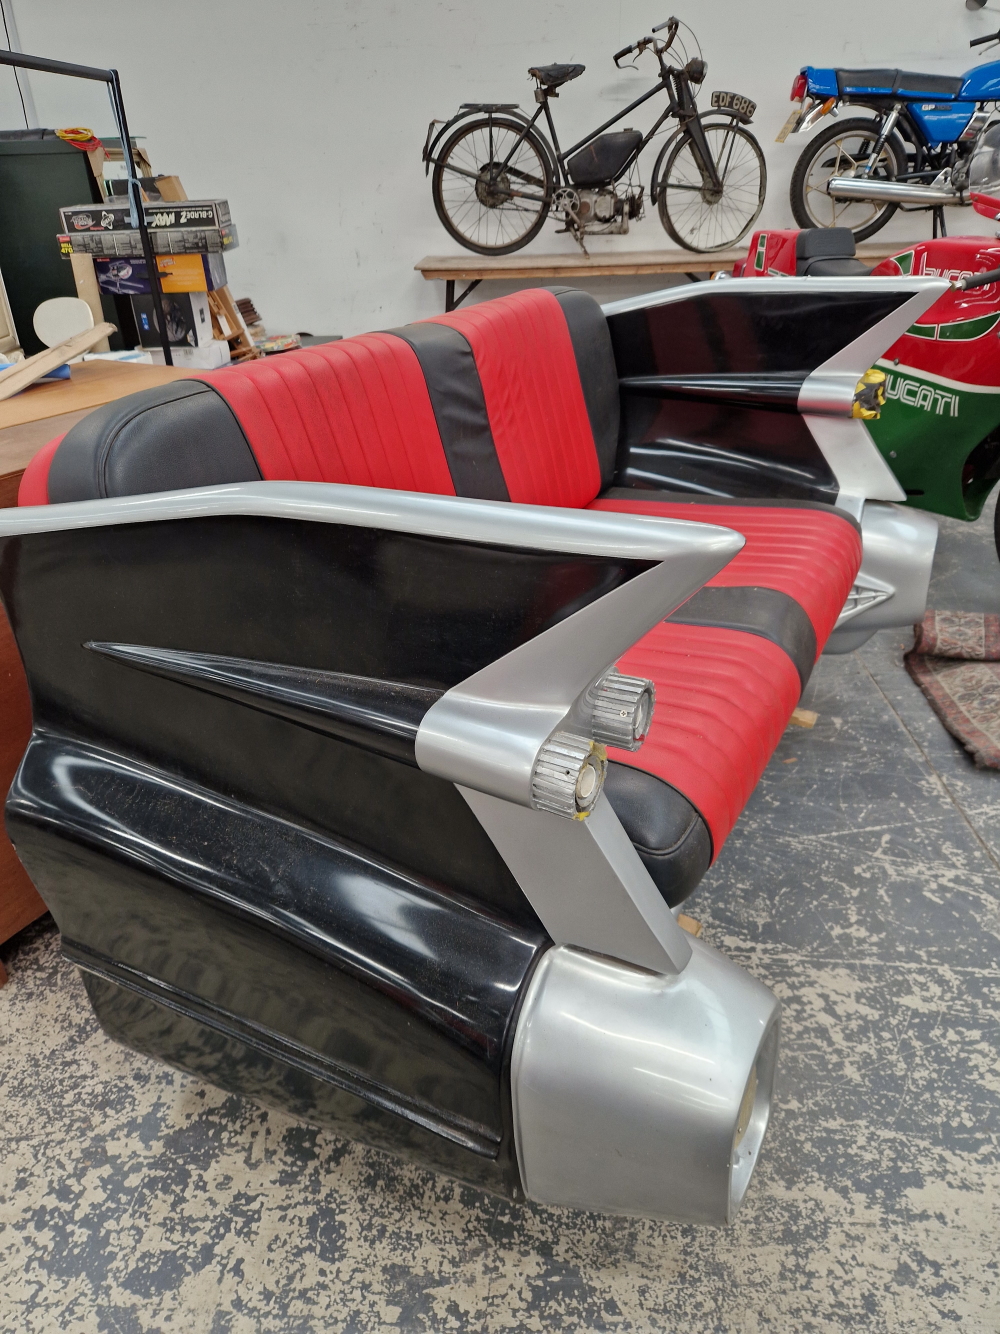 A MID CENTURY STYLE DINER SEAT FORMED AS THE TAIL END OF A CADILLAC - Image 2 of 2